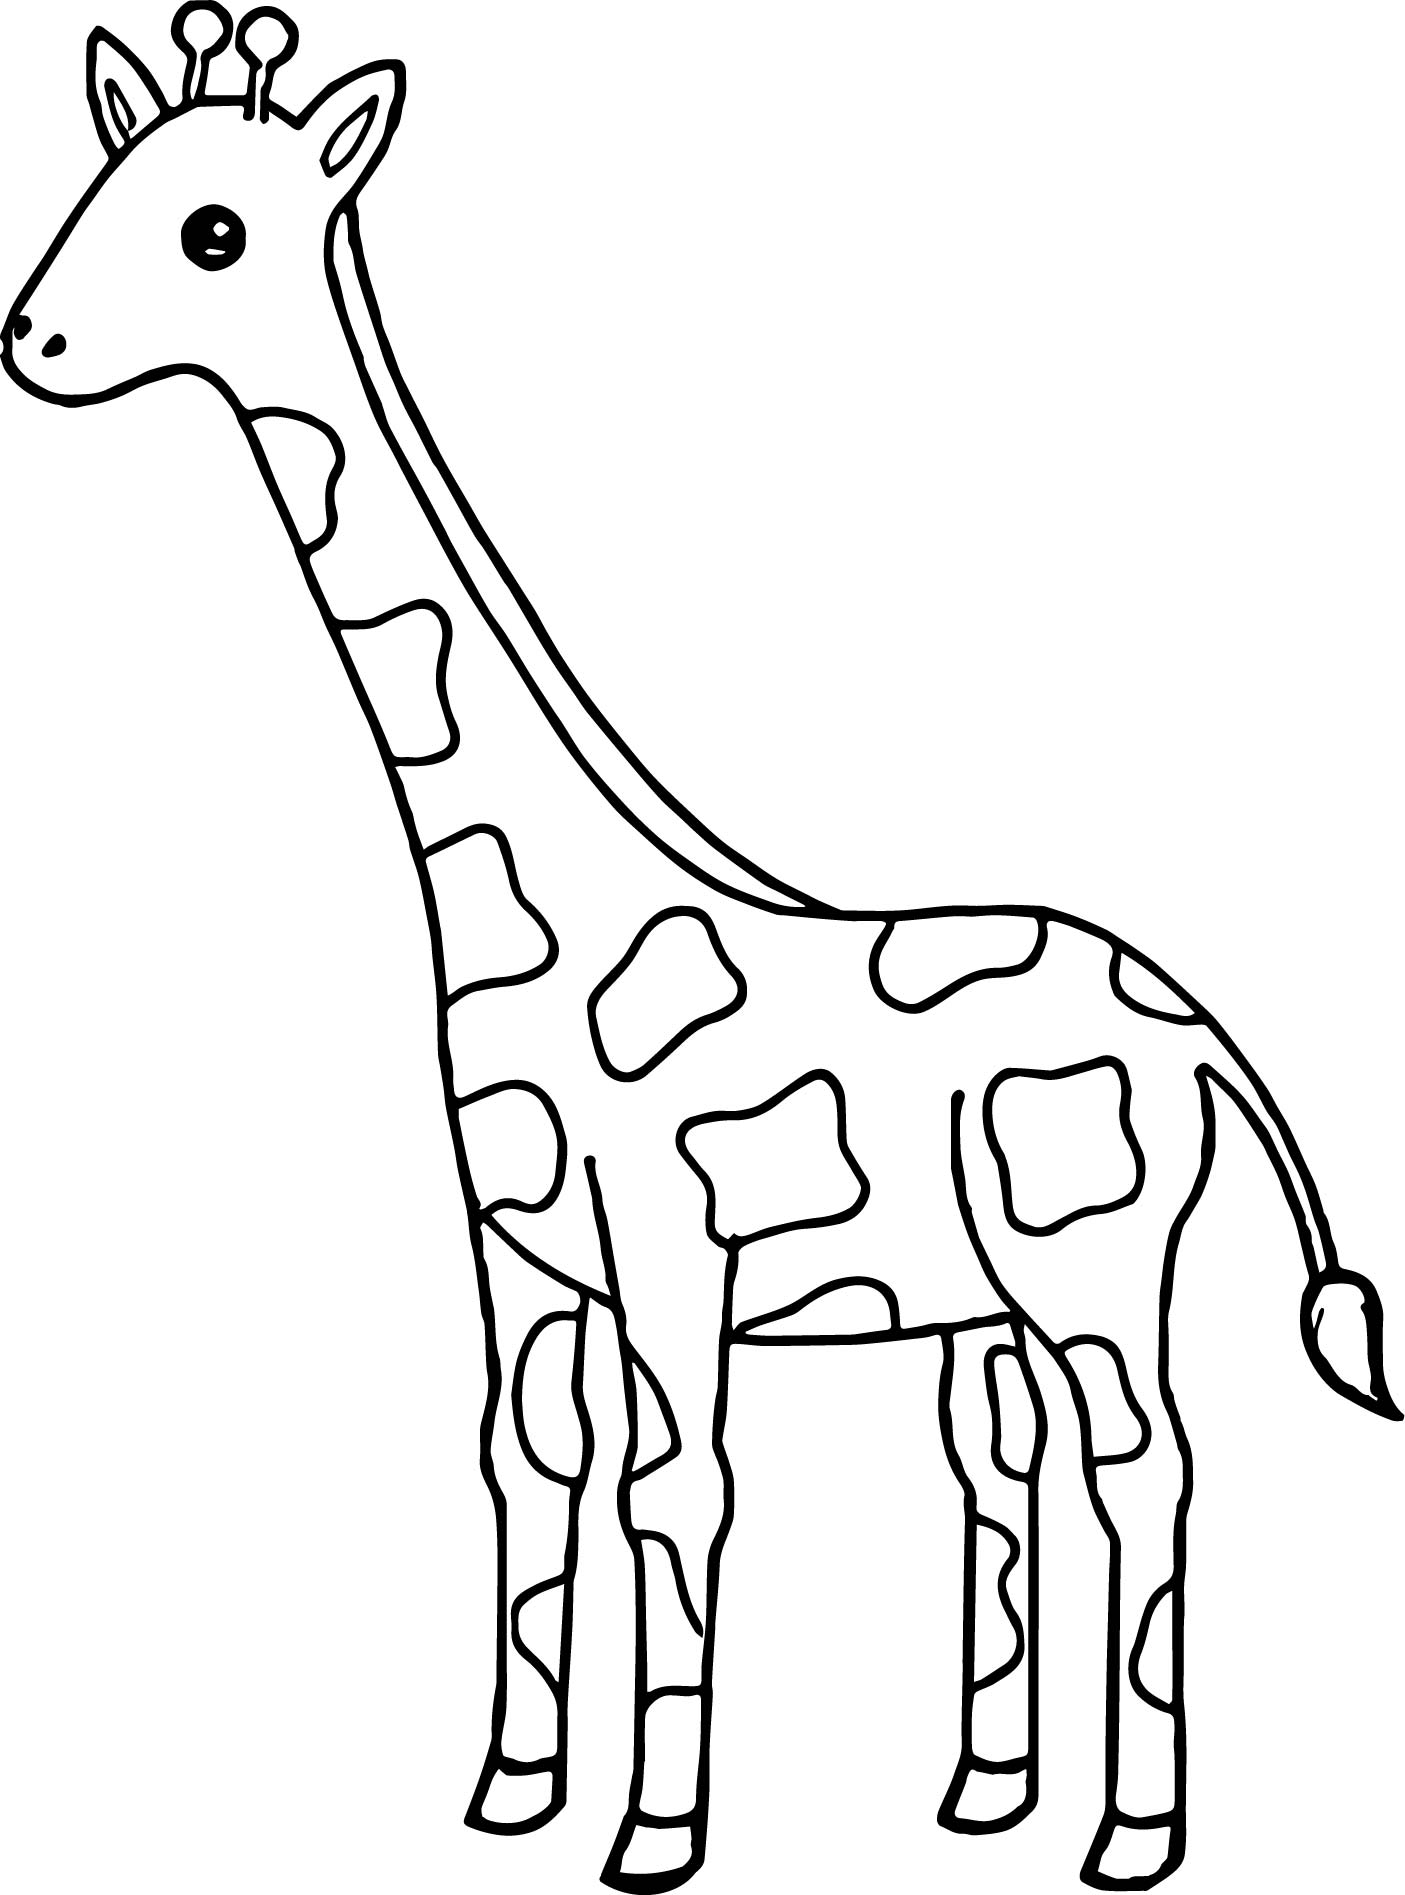 giraffe-face-coloring-pages-at-getcolorings-free-printable